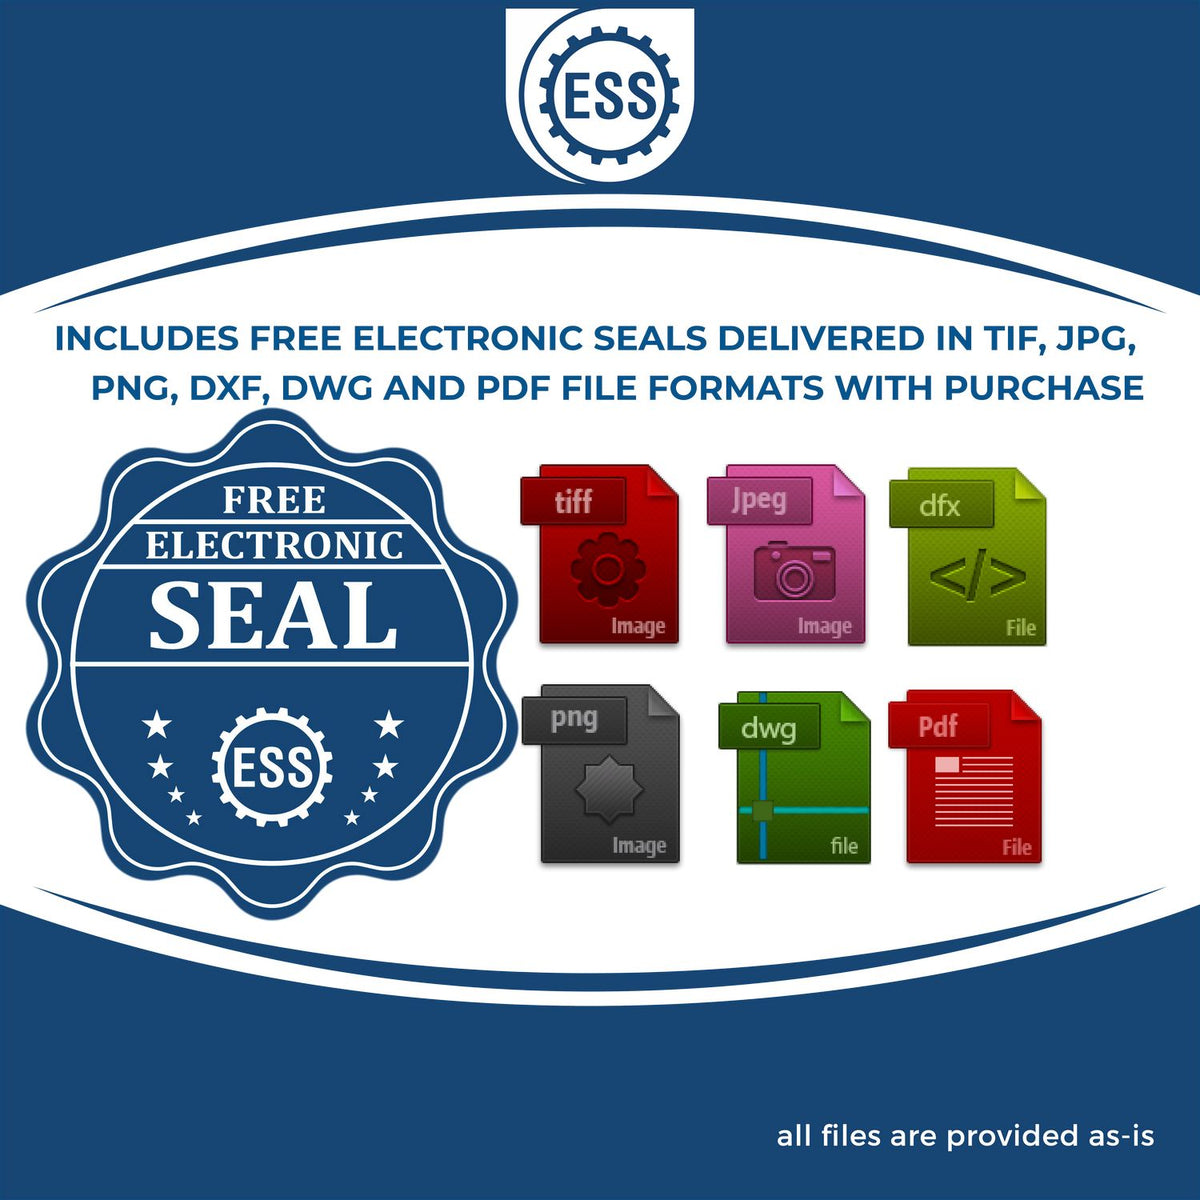 An infographic for the free electronic seal for the Long Reach Kentucky Land Surveyor Seal illustrating the different file type icons such as DXF, DWG, TIF, JPG and PNG.